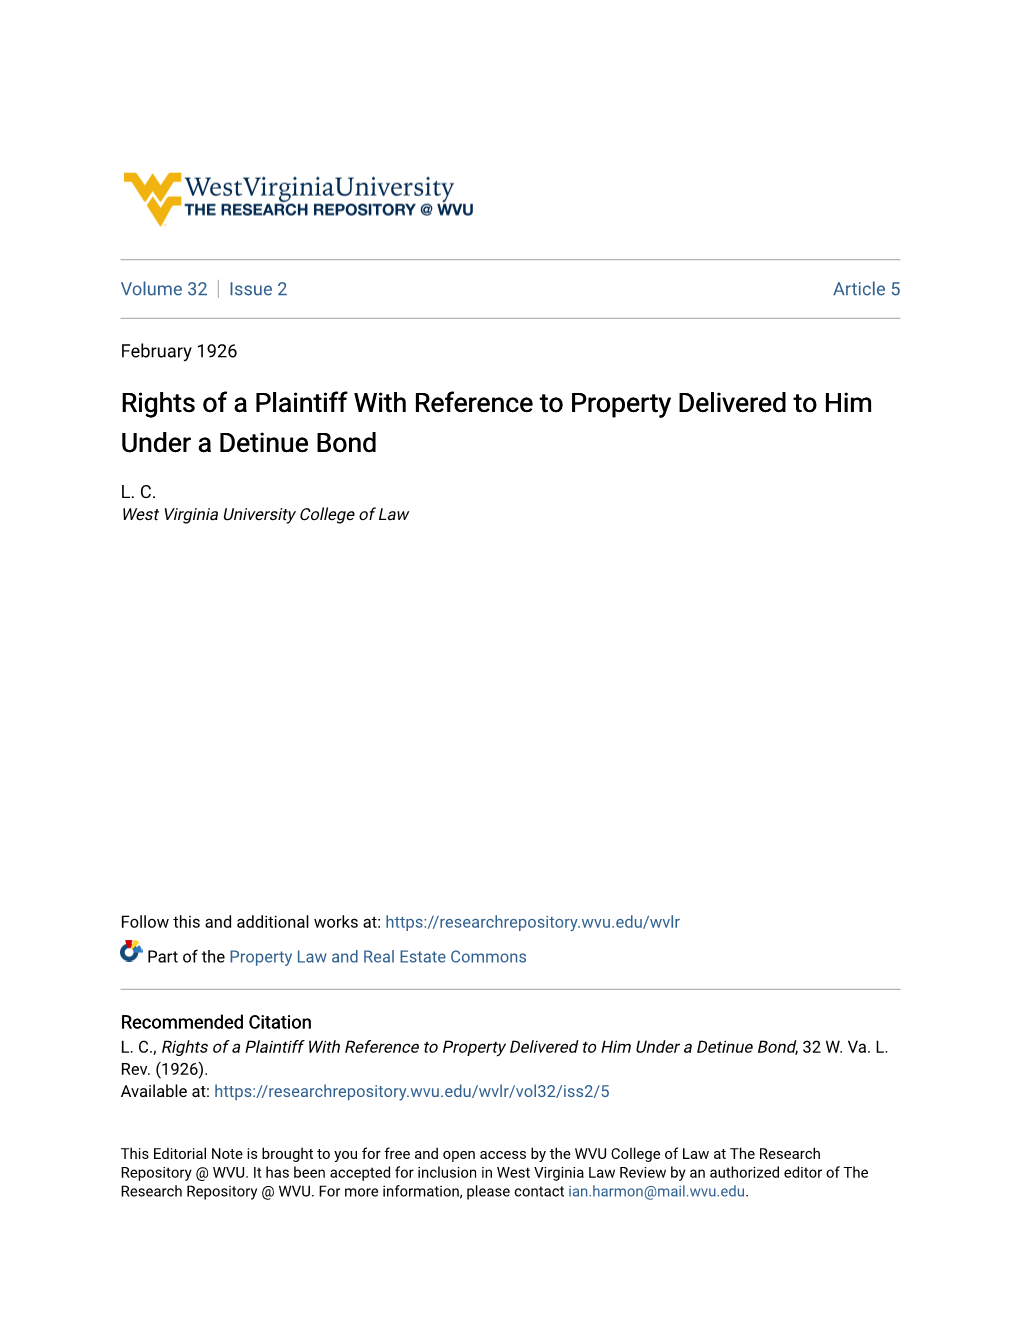 Rights of a Plaintiff with Reference to Property Delivered to Him Under a Detinue Bond